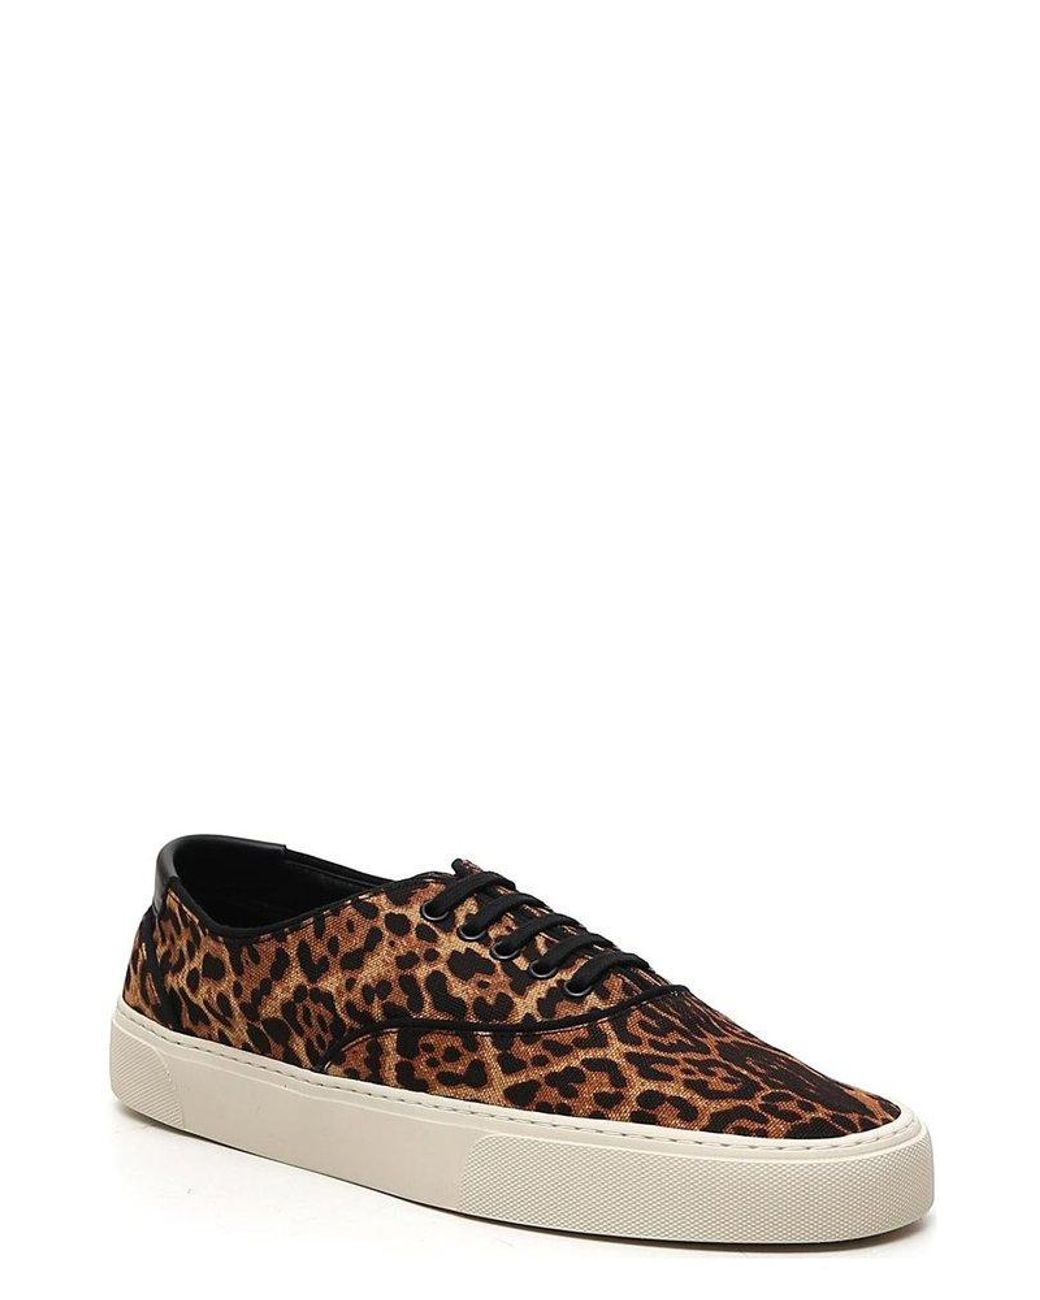 Vans Off The Wall Sneakers Lace Up Animal Leopard Print Shoes Womens 6, Mens  4.5 | eBay